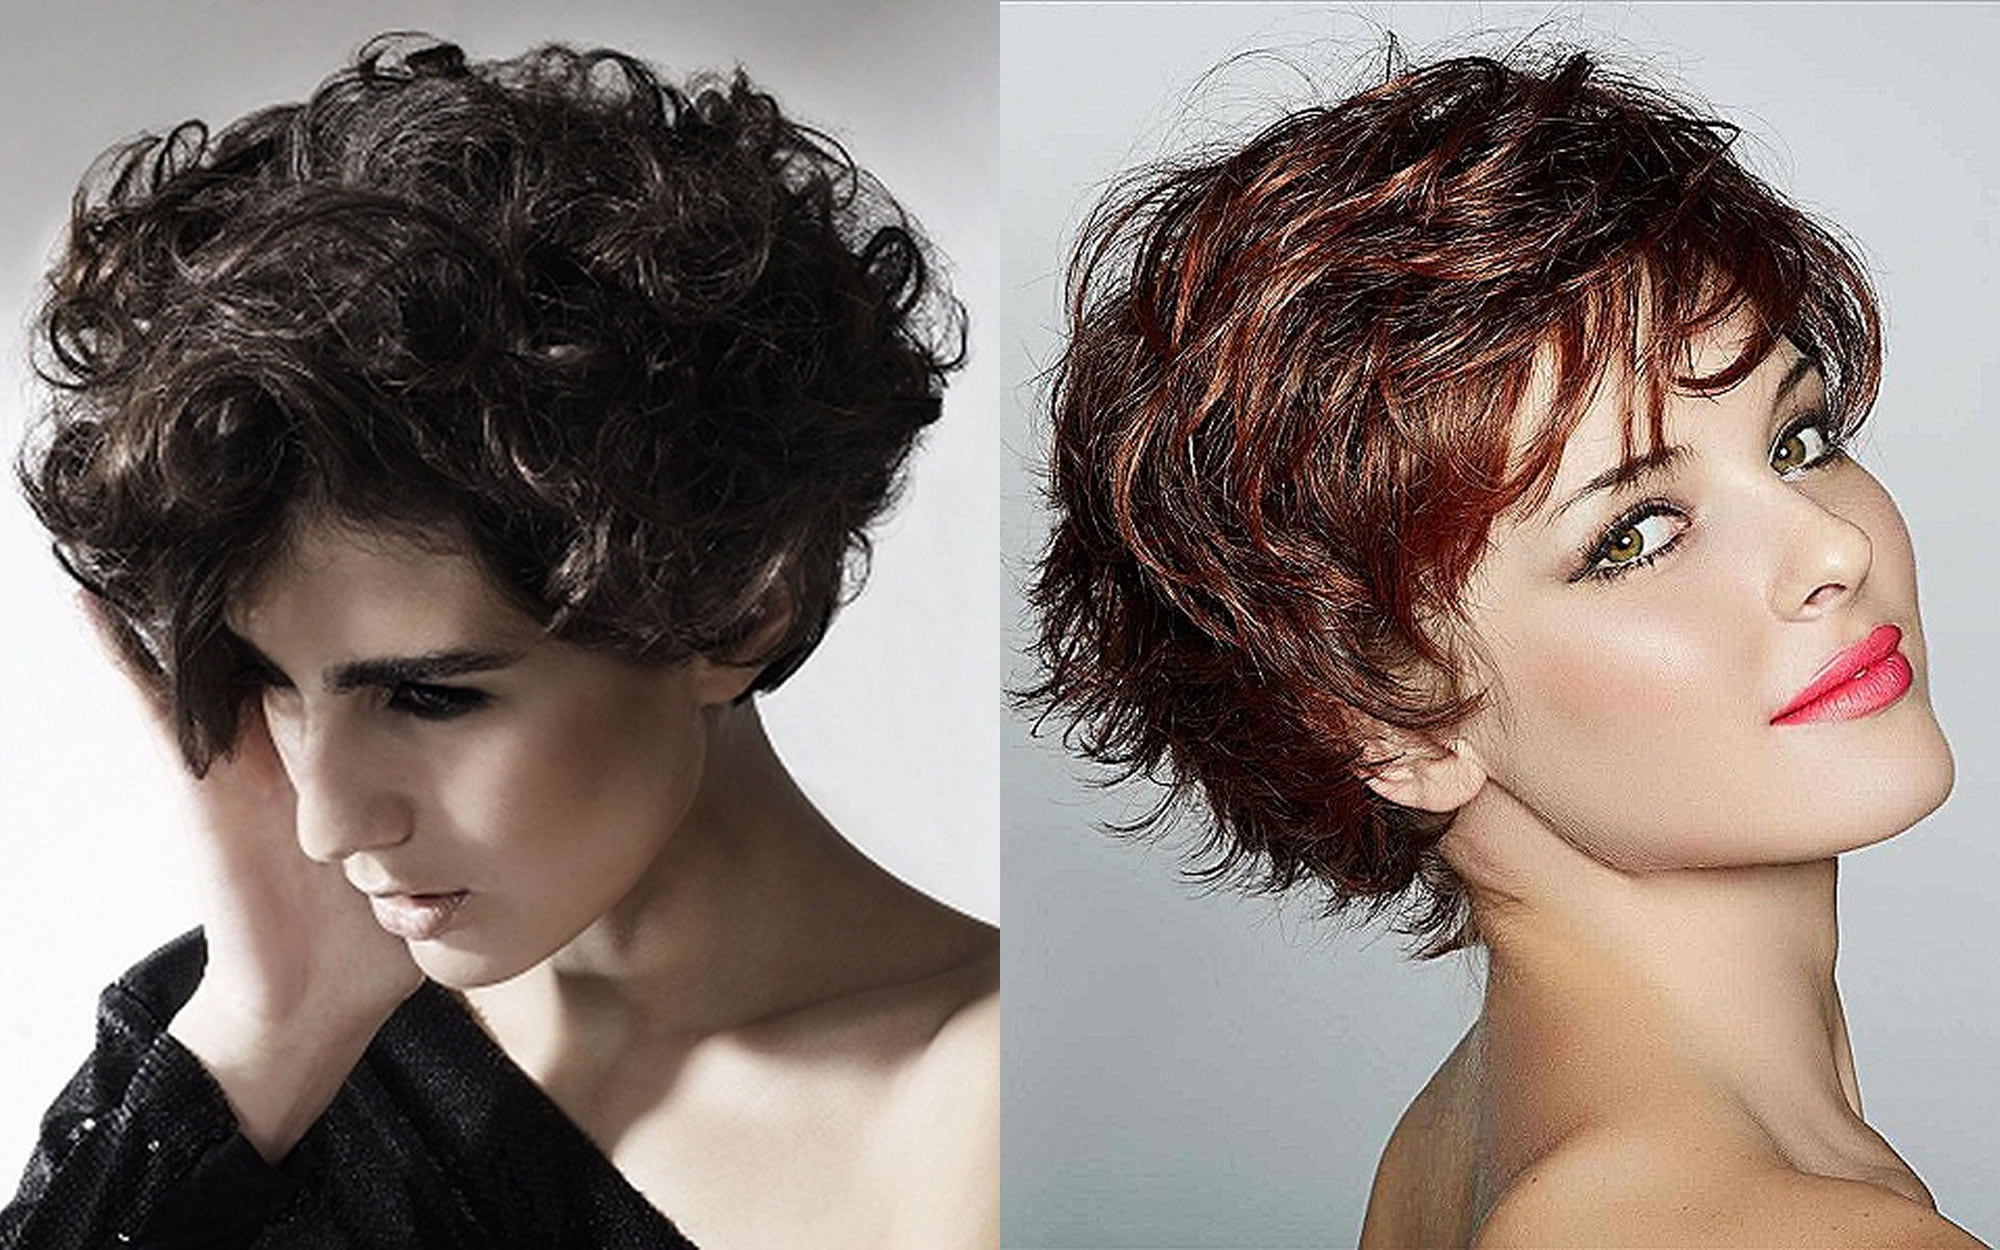 8. Short Sassy Haircuts for Curly Hair - wide 7